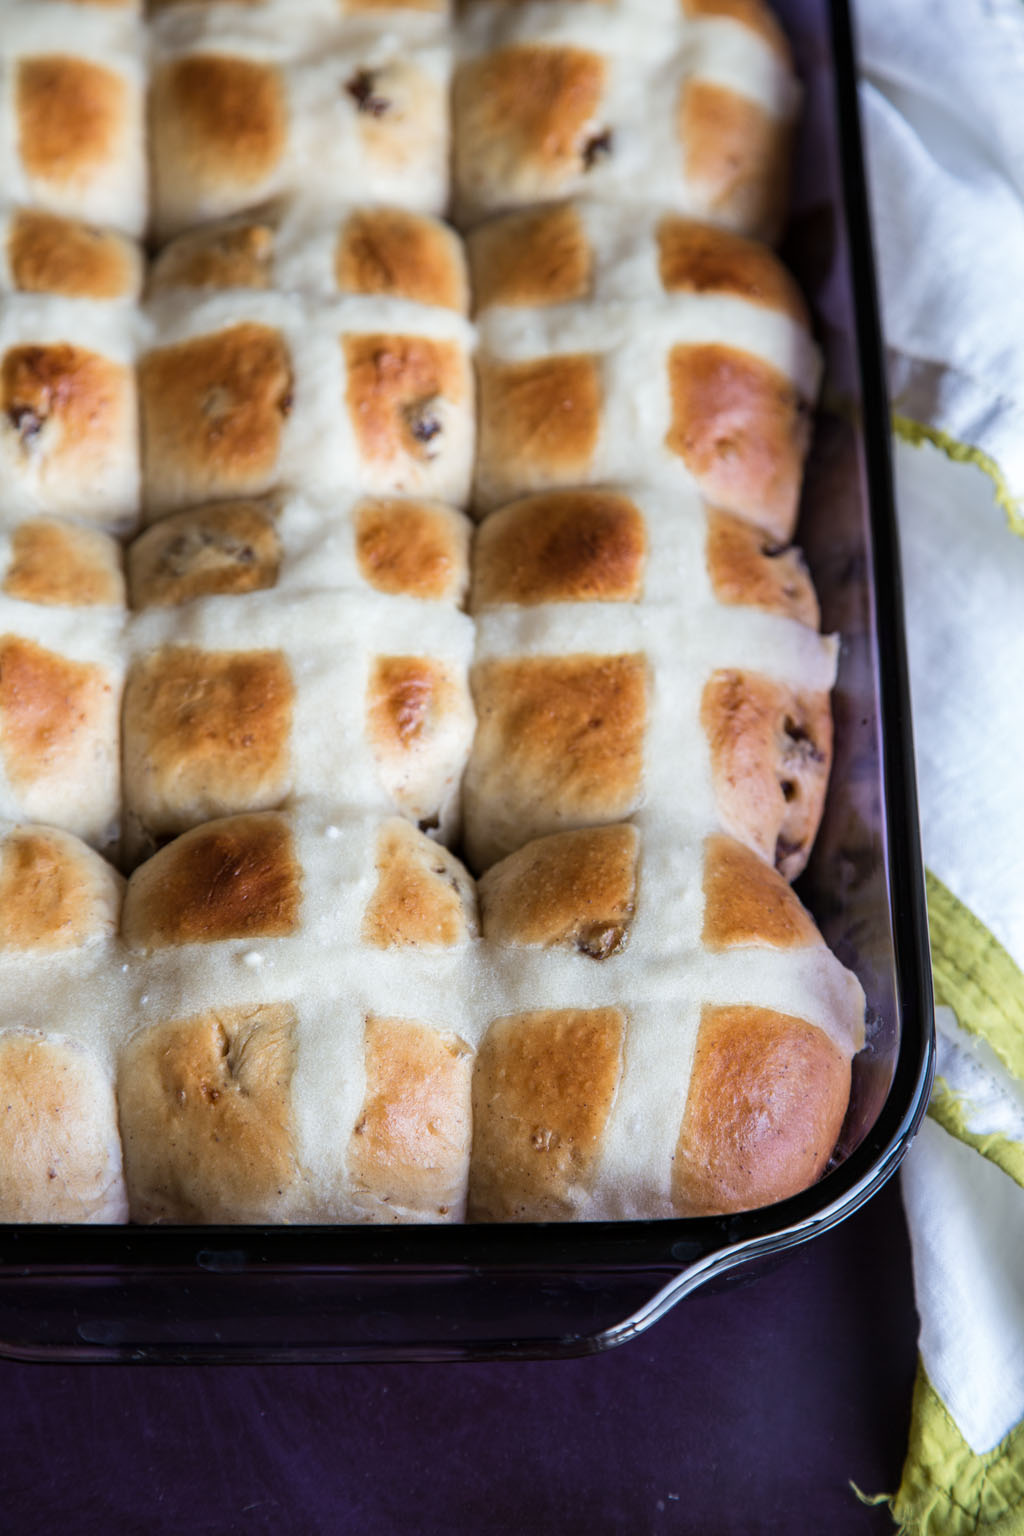 Celebrate Easter by baking this traditional hot cross buns recipe. Dried figs add a chewy sweet bite in the tender old fashioned hot cross buns recipe.